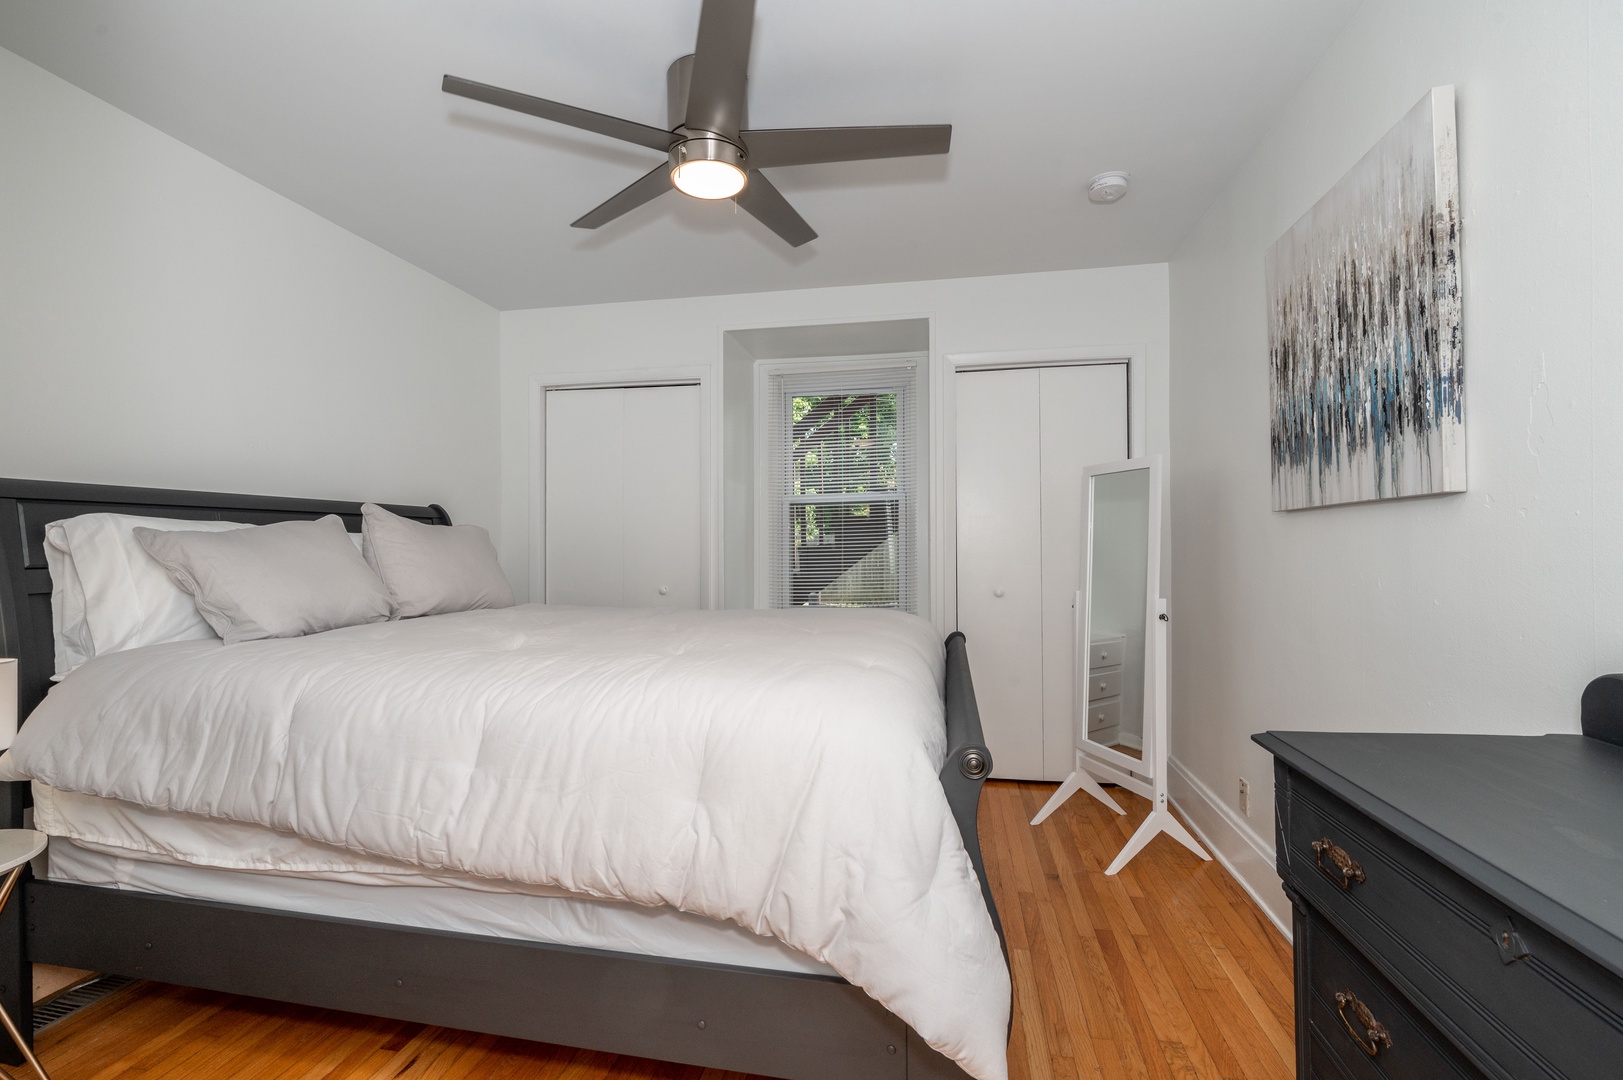 The tranquil queen bedroom includes a ceiling fan & standing mirror